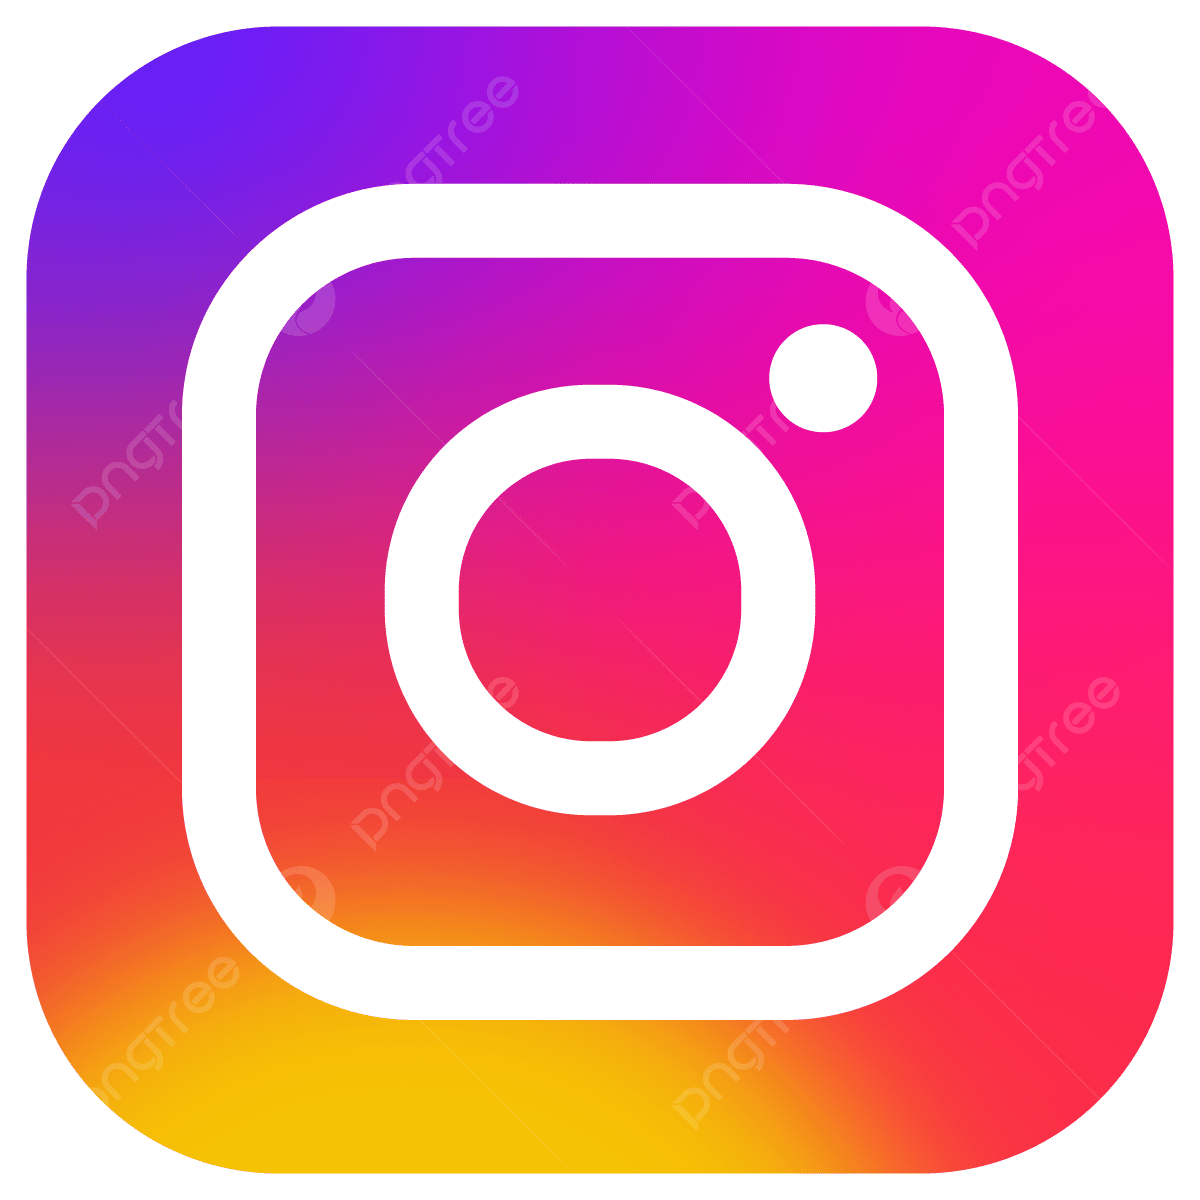 pngtree-instagram-icon-png-image_8704817